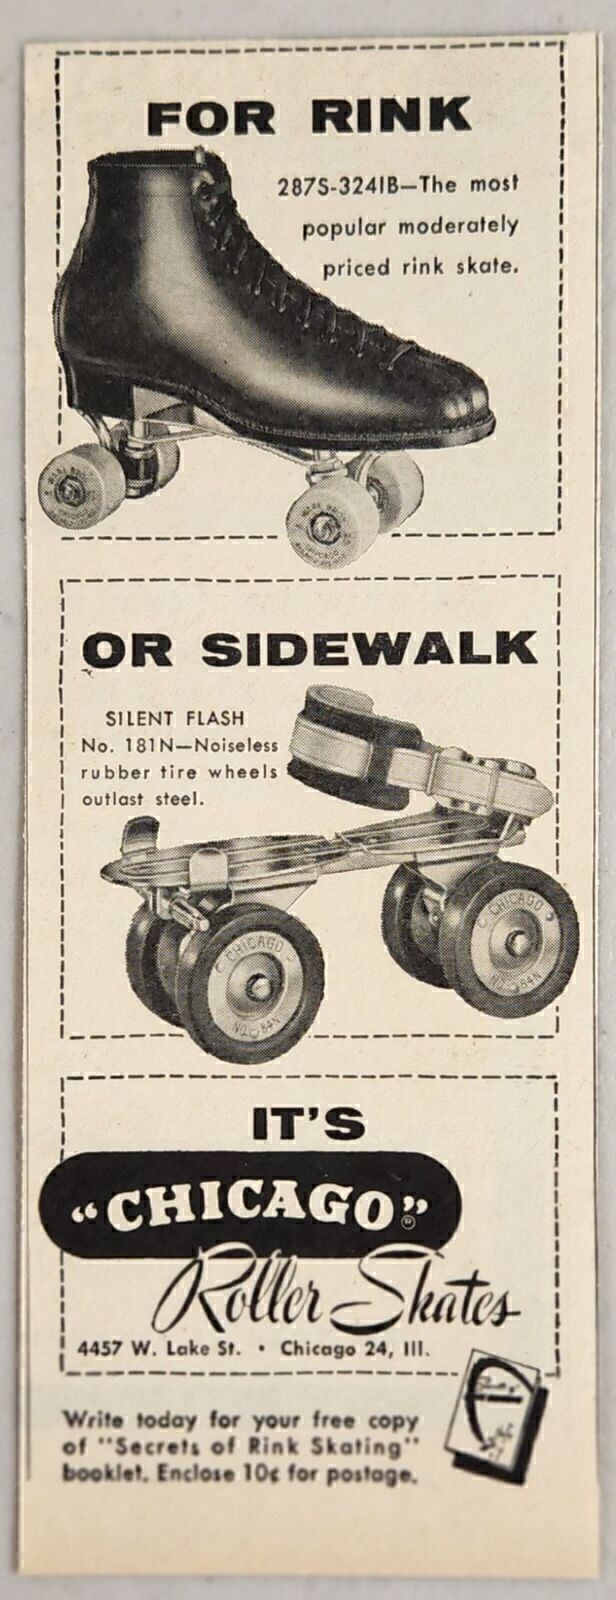 1955 Print Ad Chicago Roller Skates For Rink & Sidewalks Made in Chicago,IL